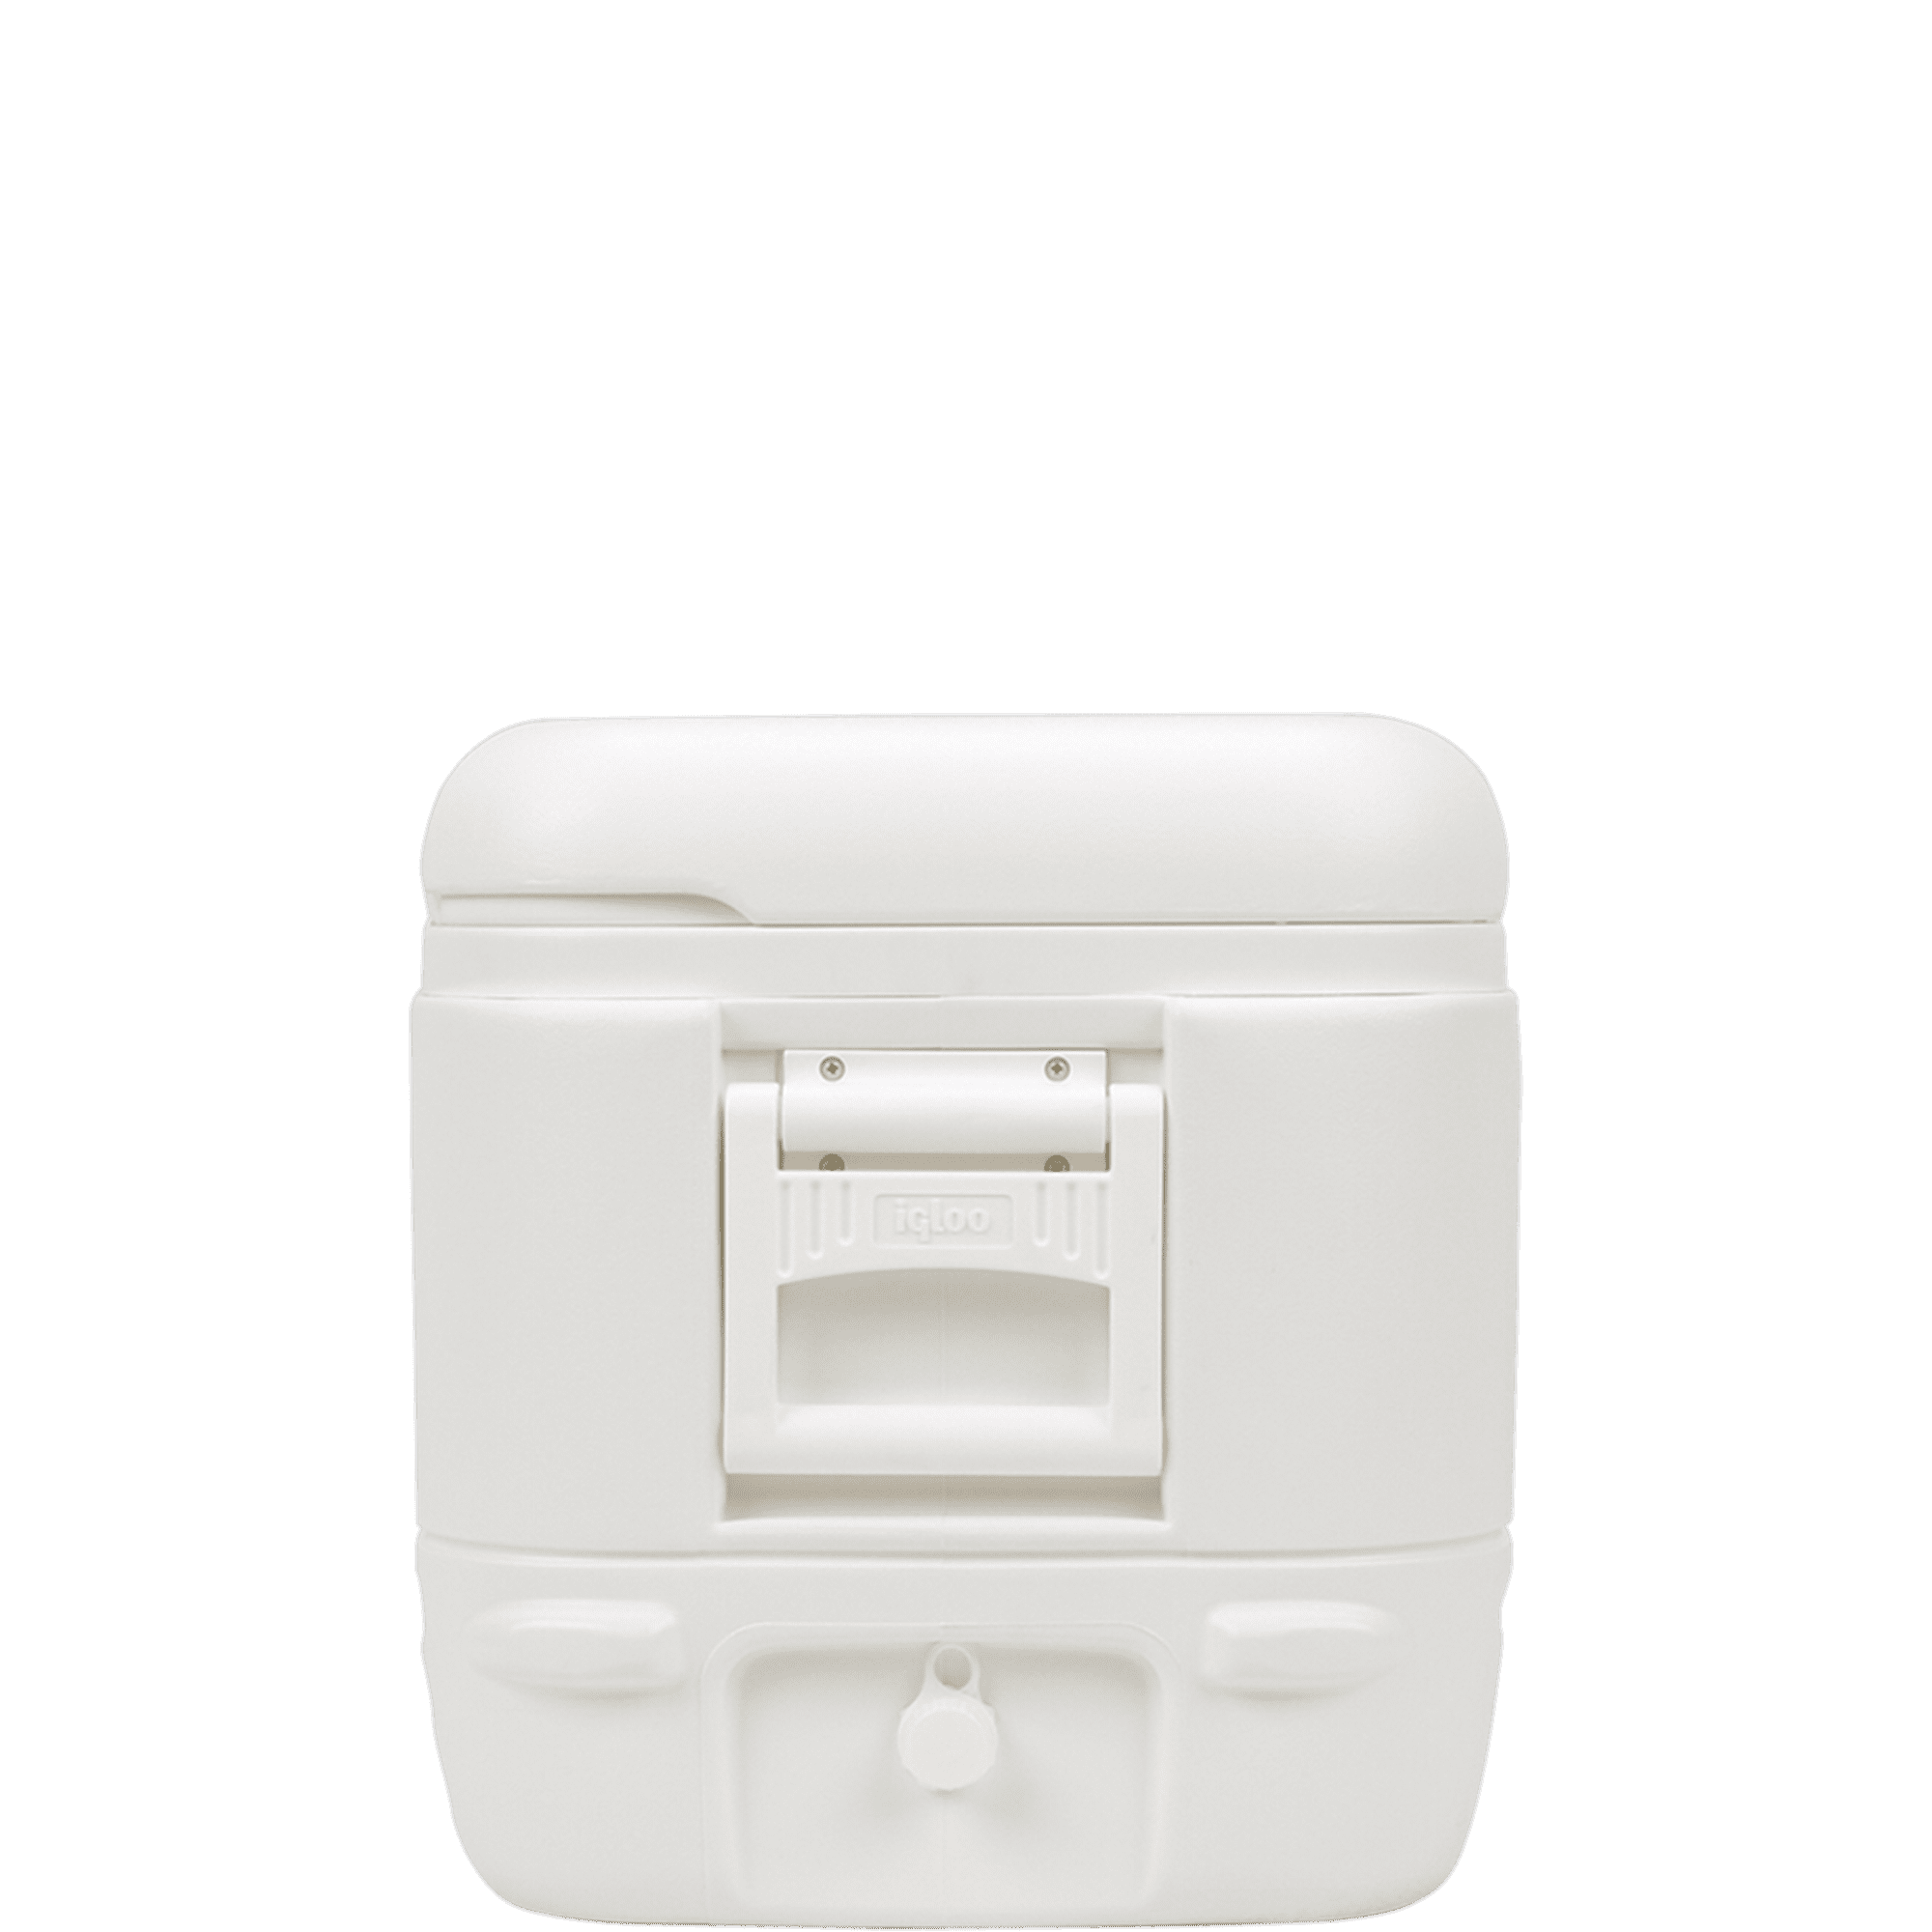 Igloo 120 qt. Quick & Cool Polar Ice Chest Cooler, White